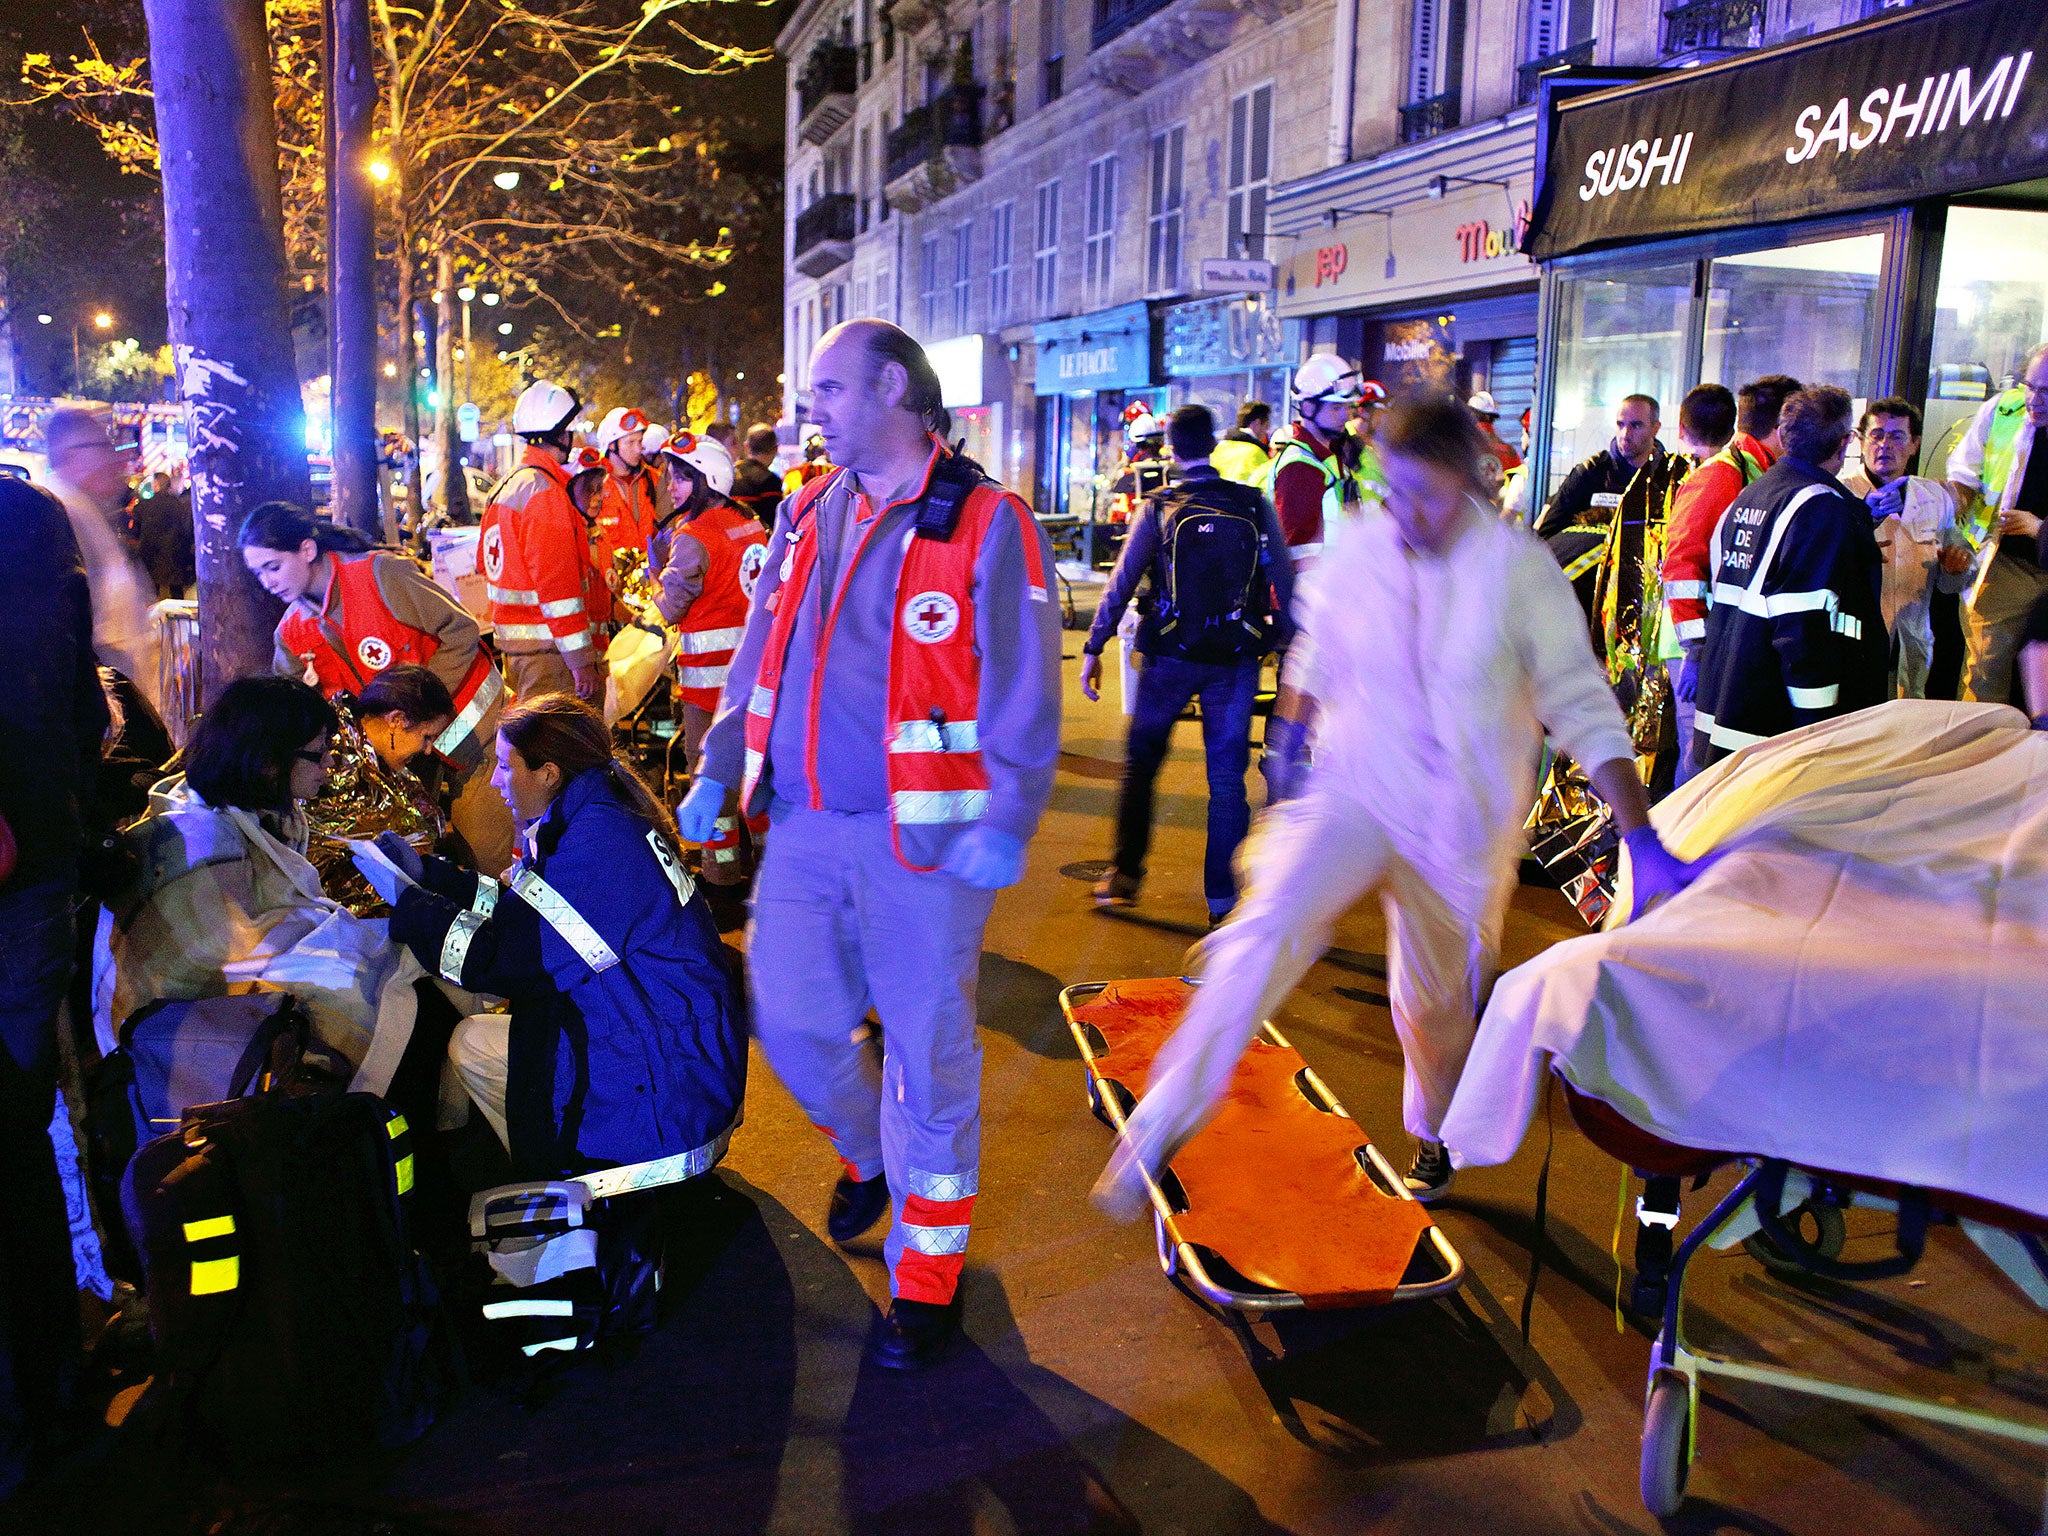 Apocalyptic press coverage and predictions of further attacks in Paris play into the hands of Isis